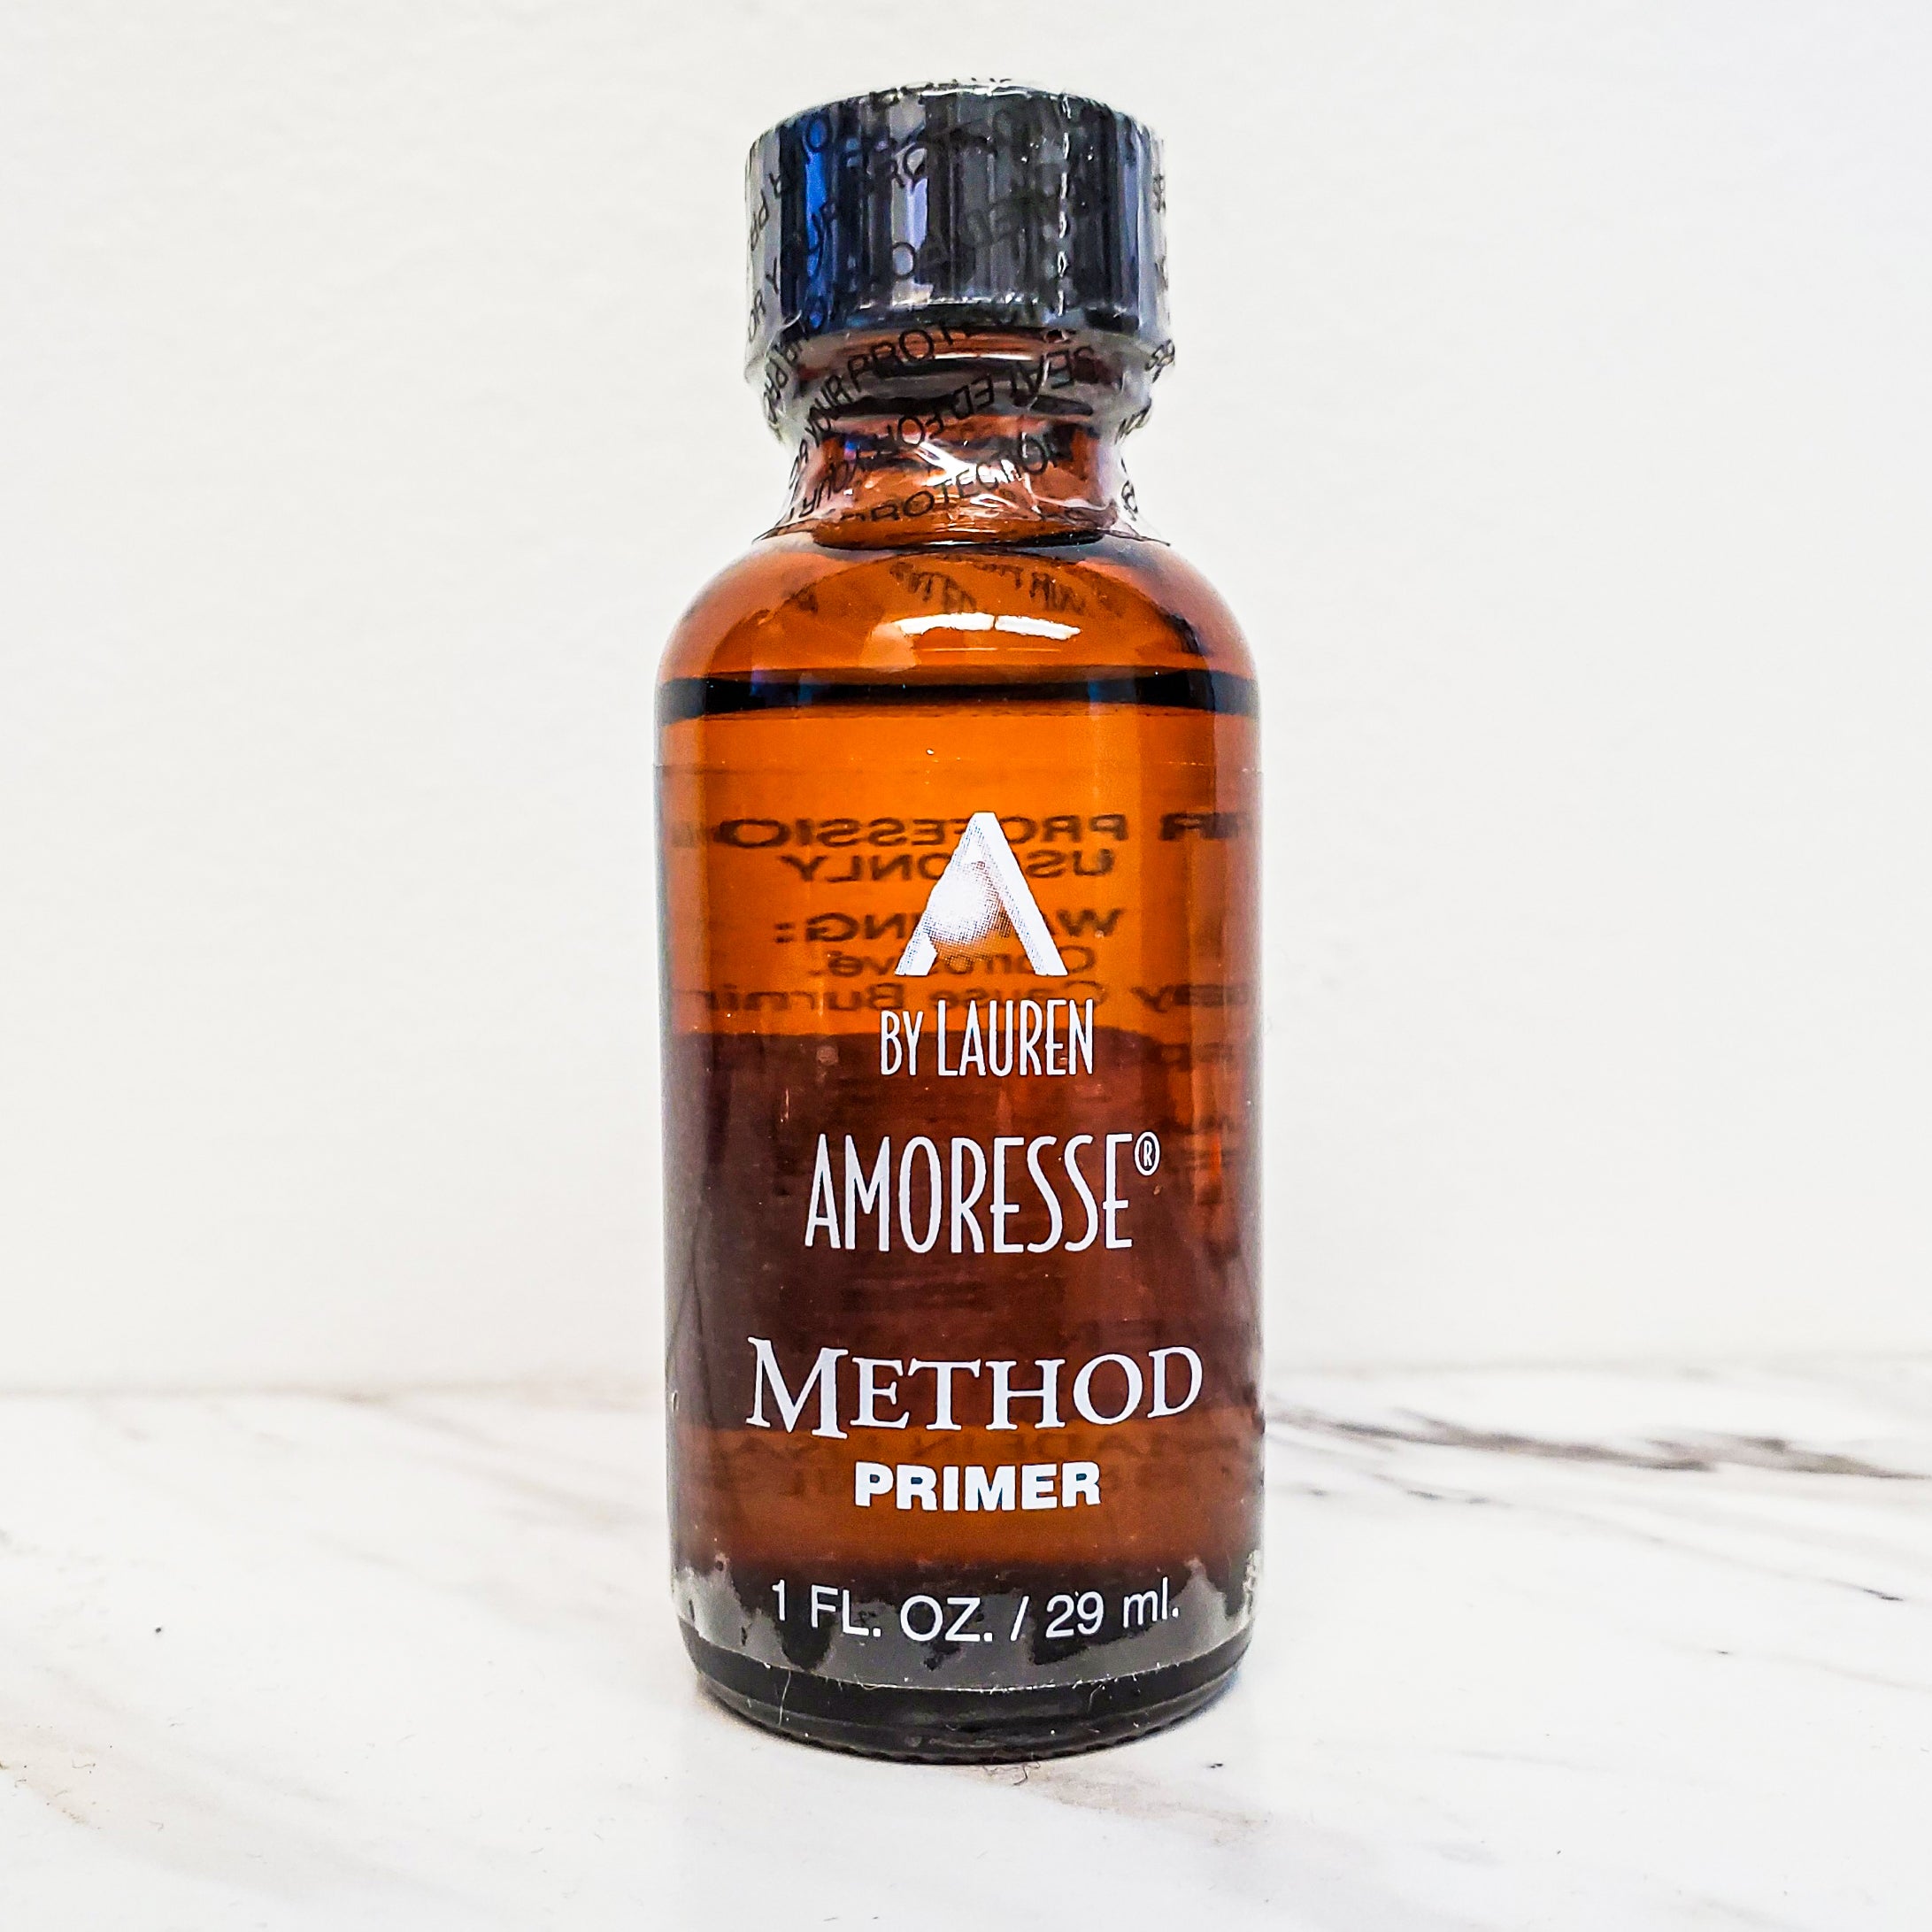 Amoresse Method Primer - Creata Beauty - Professional Beauty Products